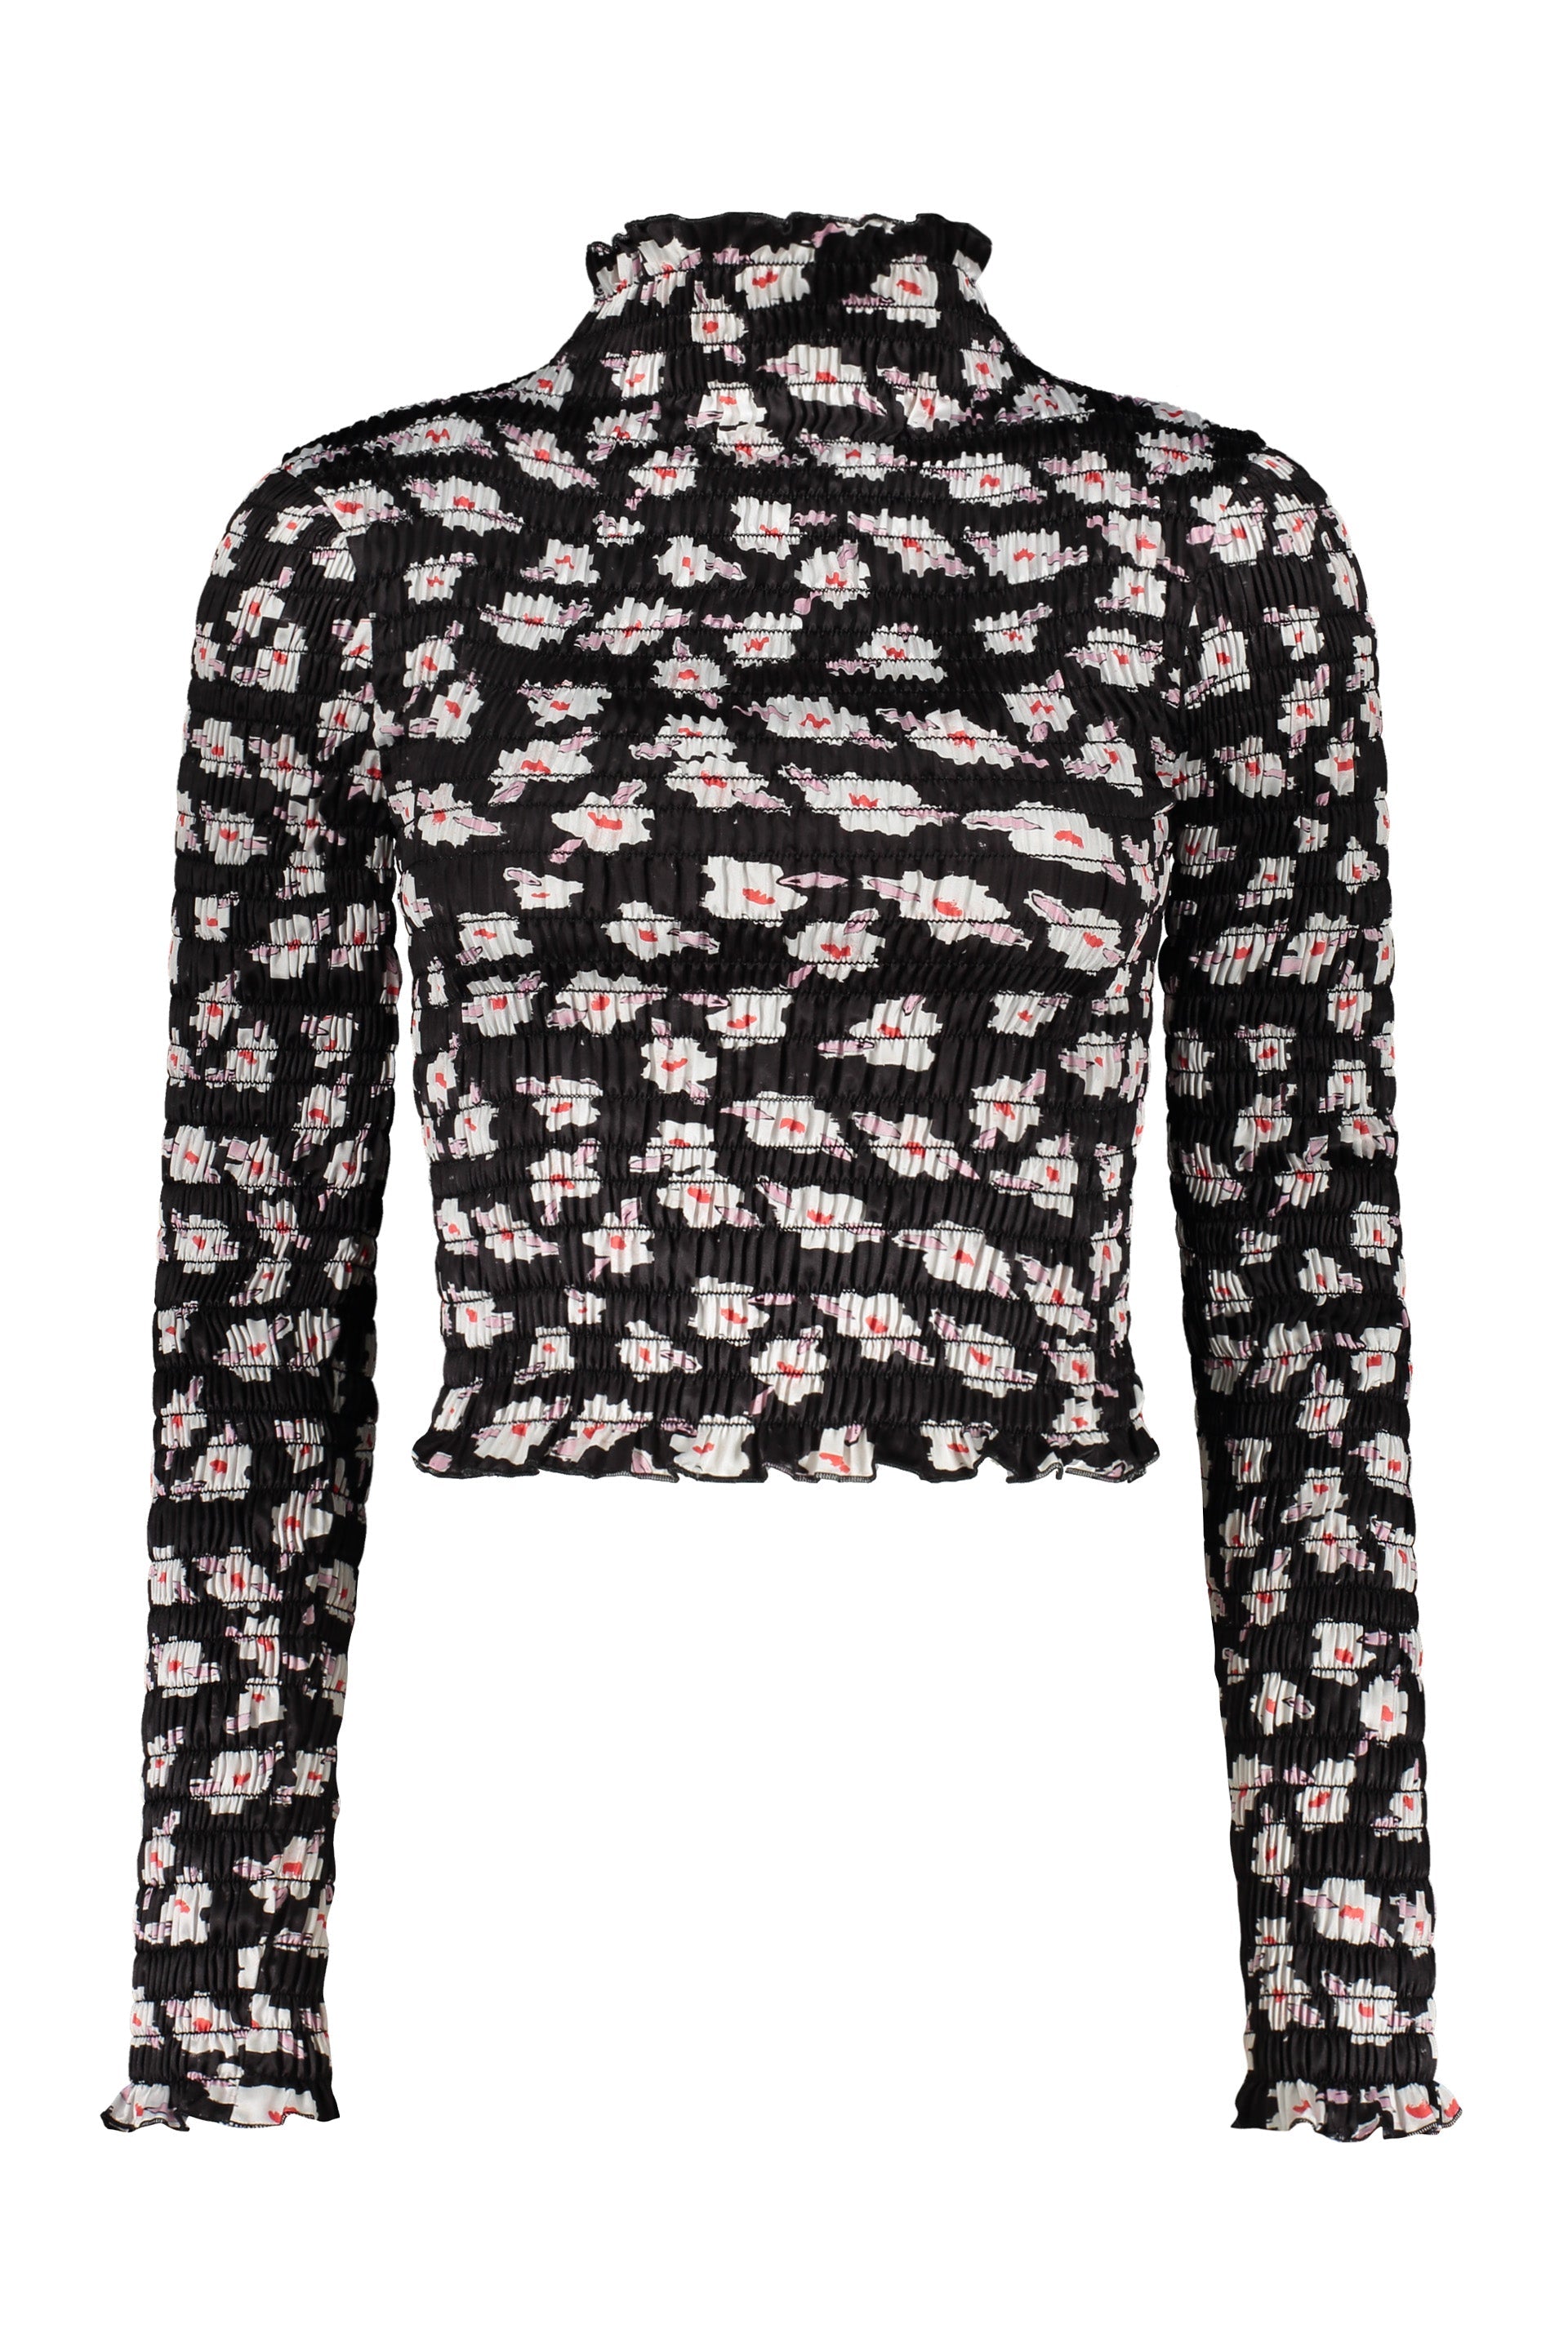 Amy-Crookes-OUTLET-SALE-Printed-long-sleeve-top-Shirts-ML-ARCHIVE-COLLECTION.jpg